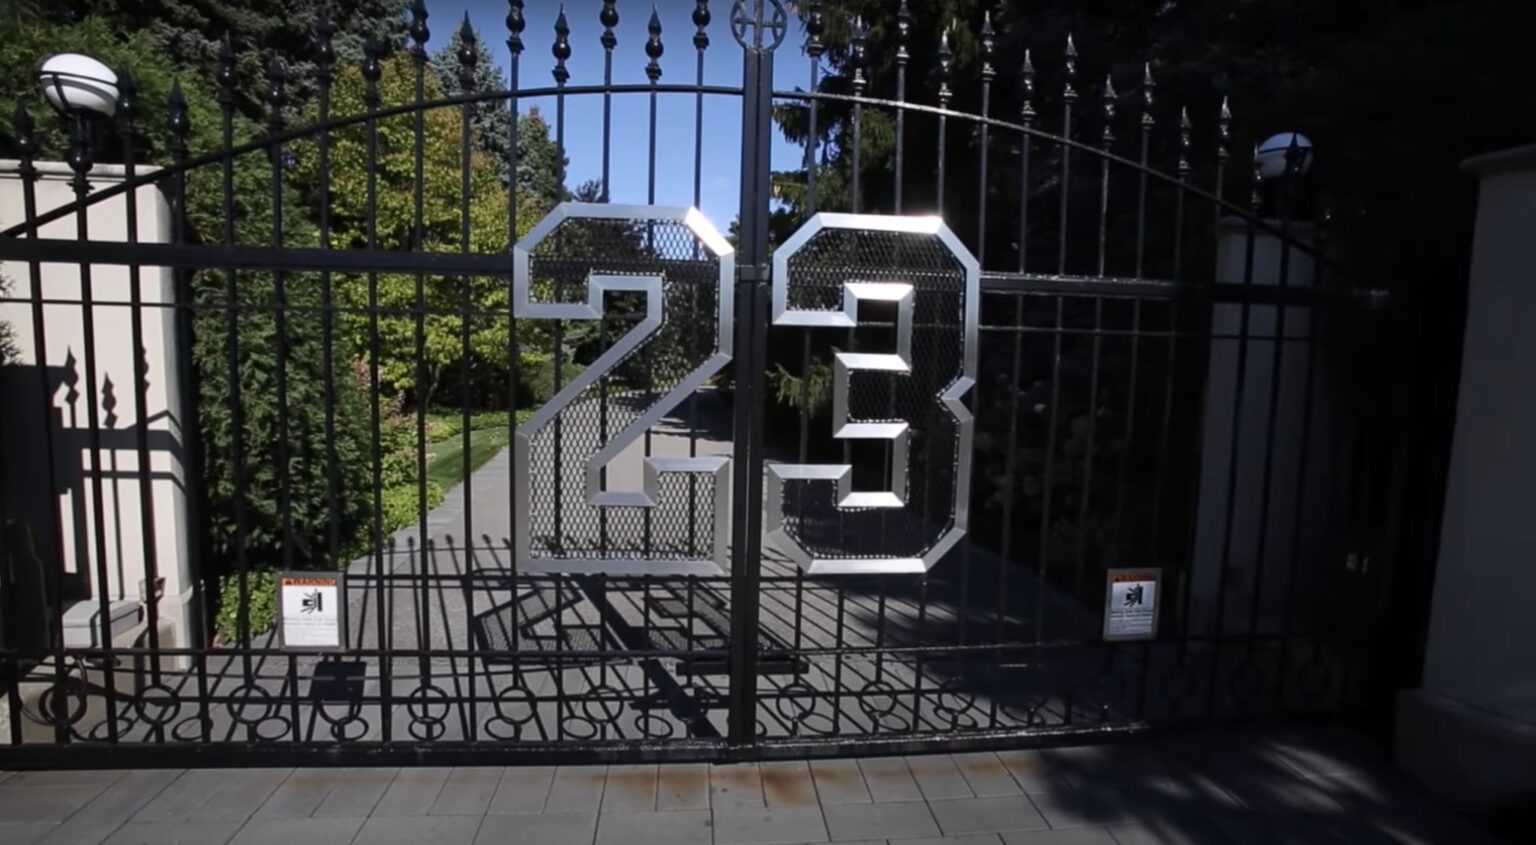 2020's 'The Last Dance' reignited most conversations surrounding Michael Jordan, except the sale of his house. Why can't the NBA legend move off his digs?